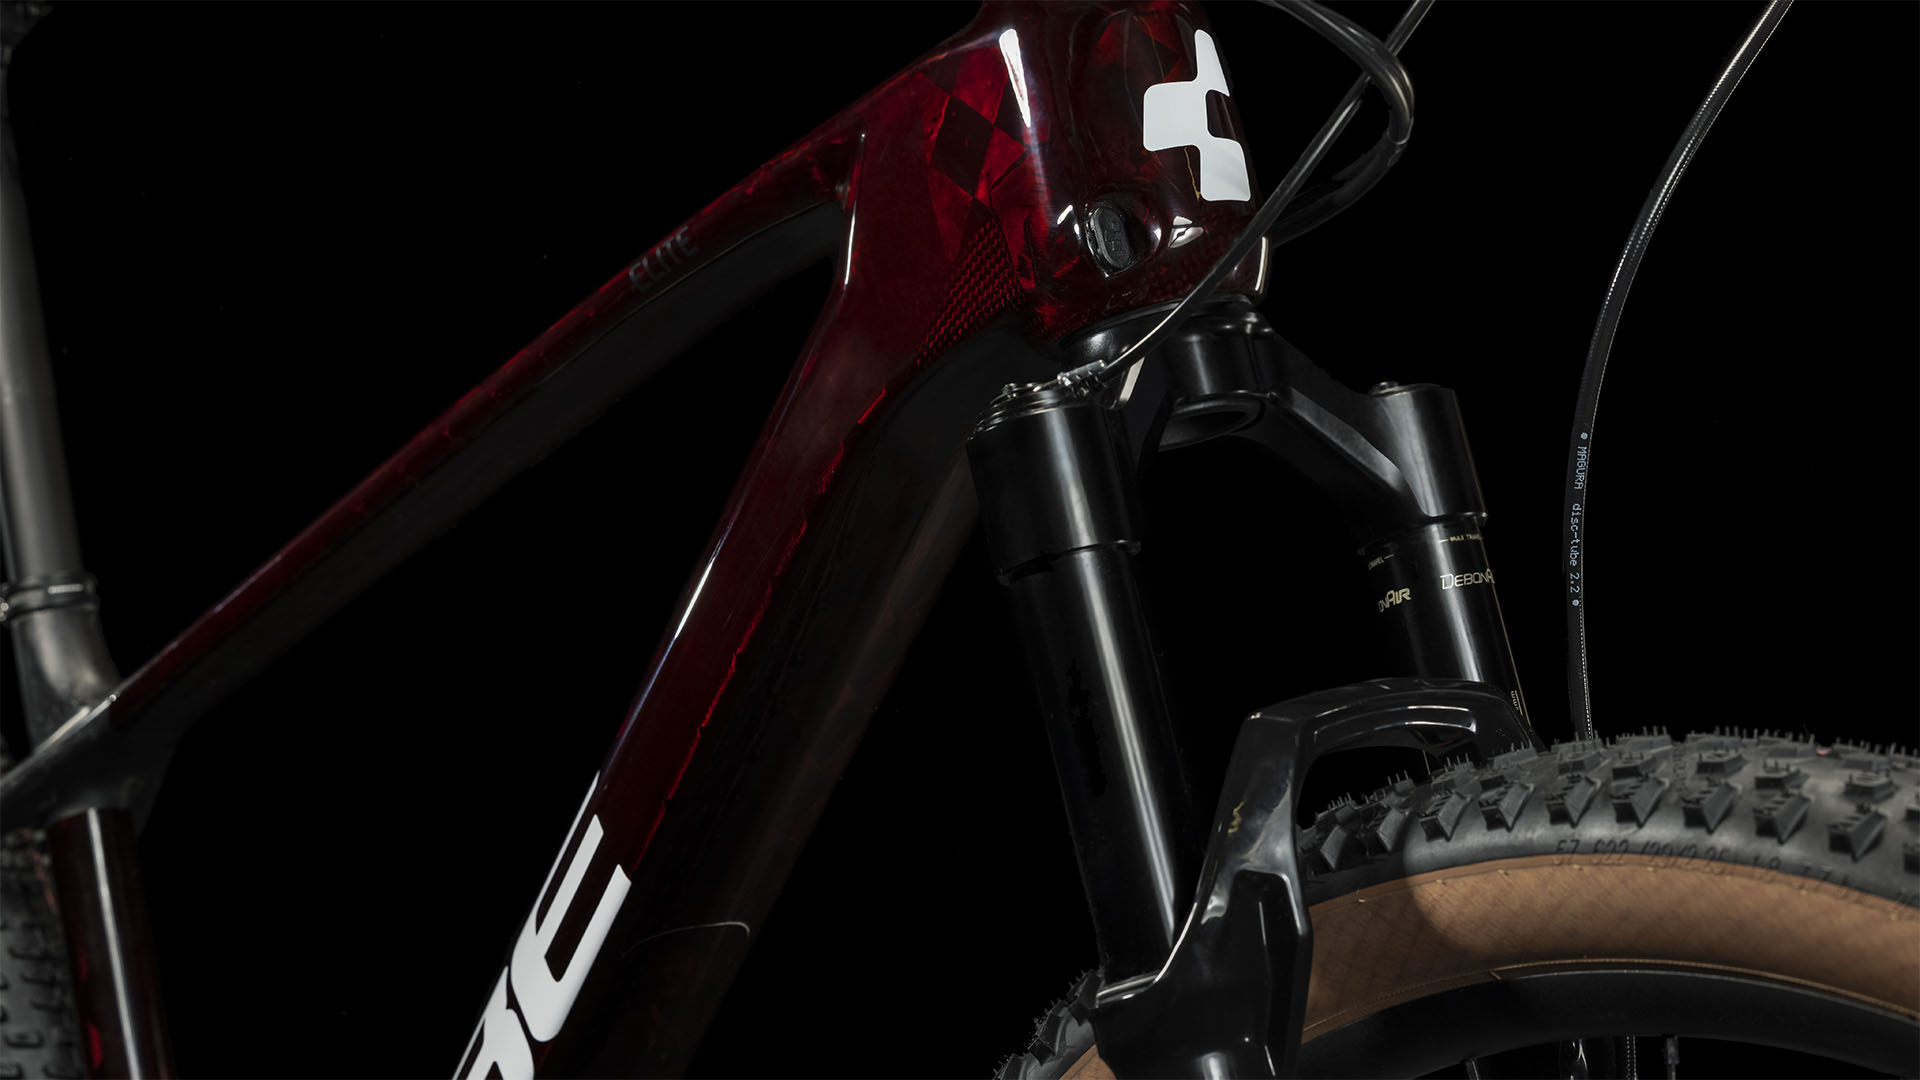 Cube Elite C:68X Race liquidred´n´carbon (Bike Modell 2023) bei tyl4sports.at